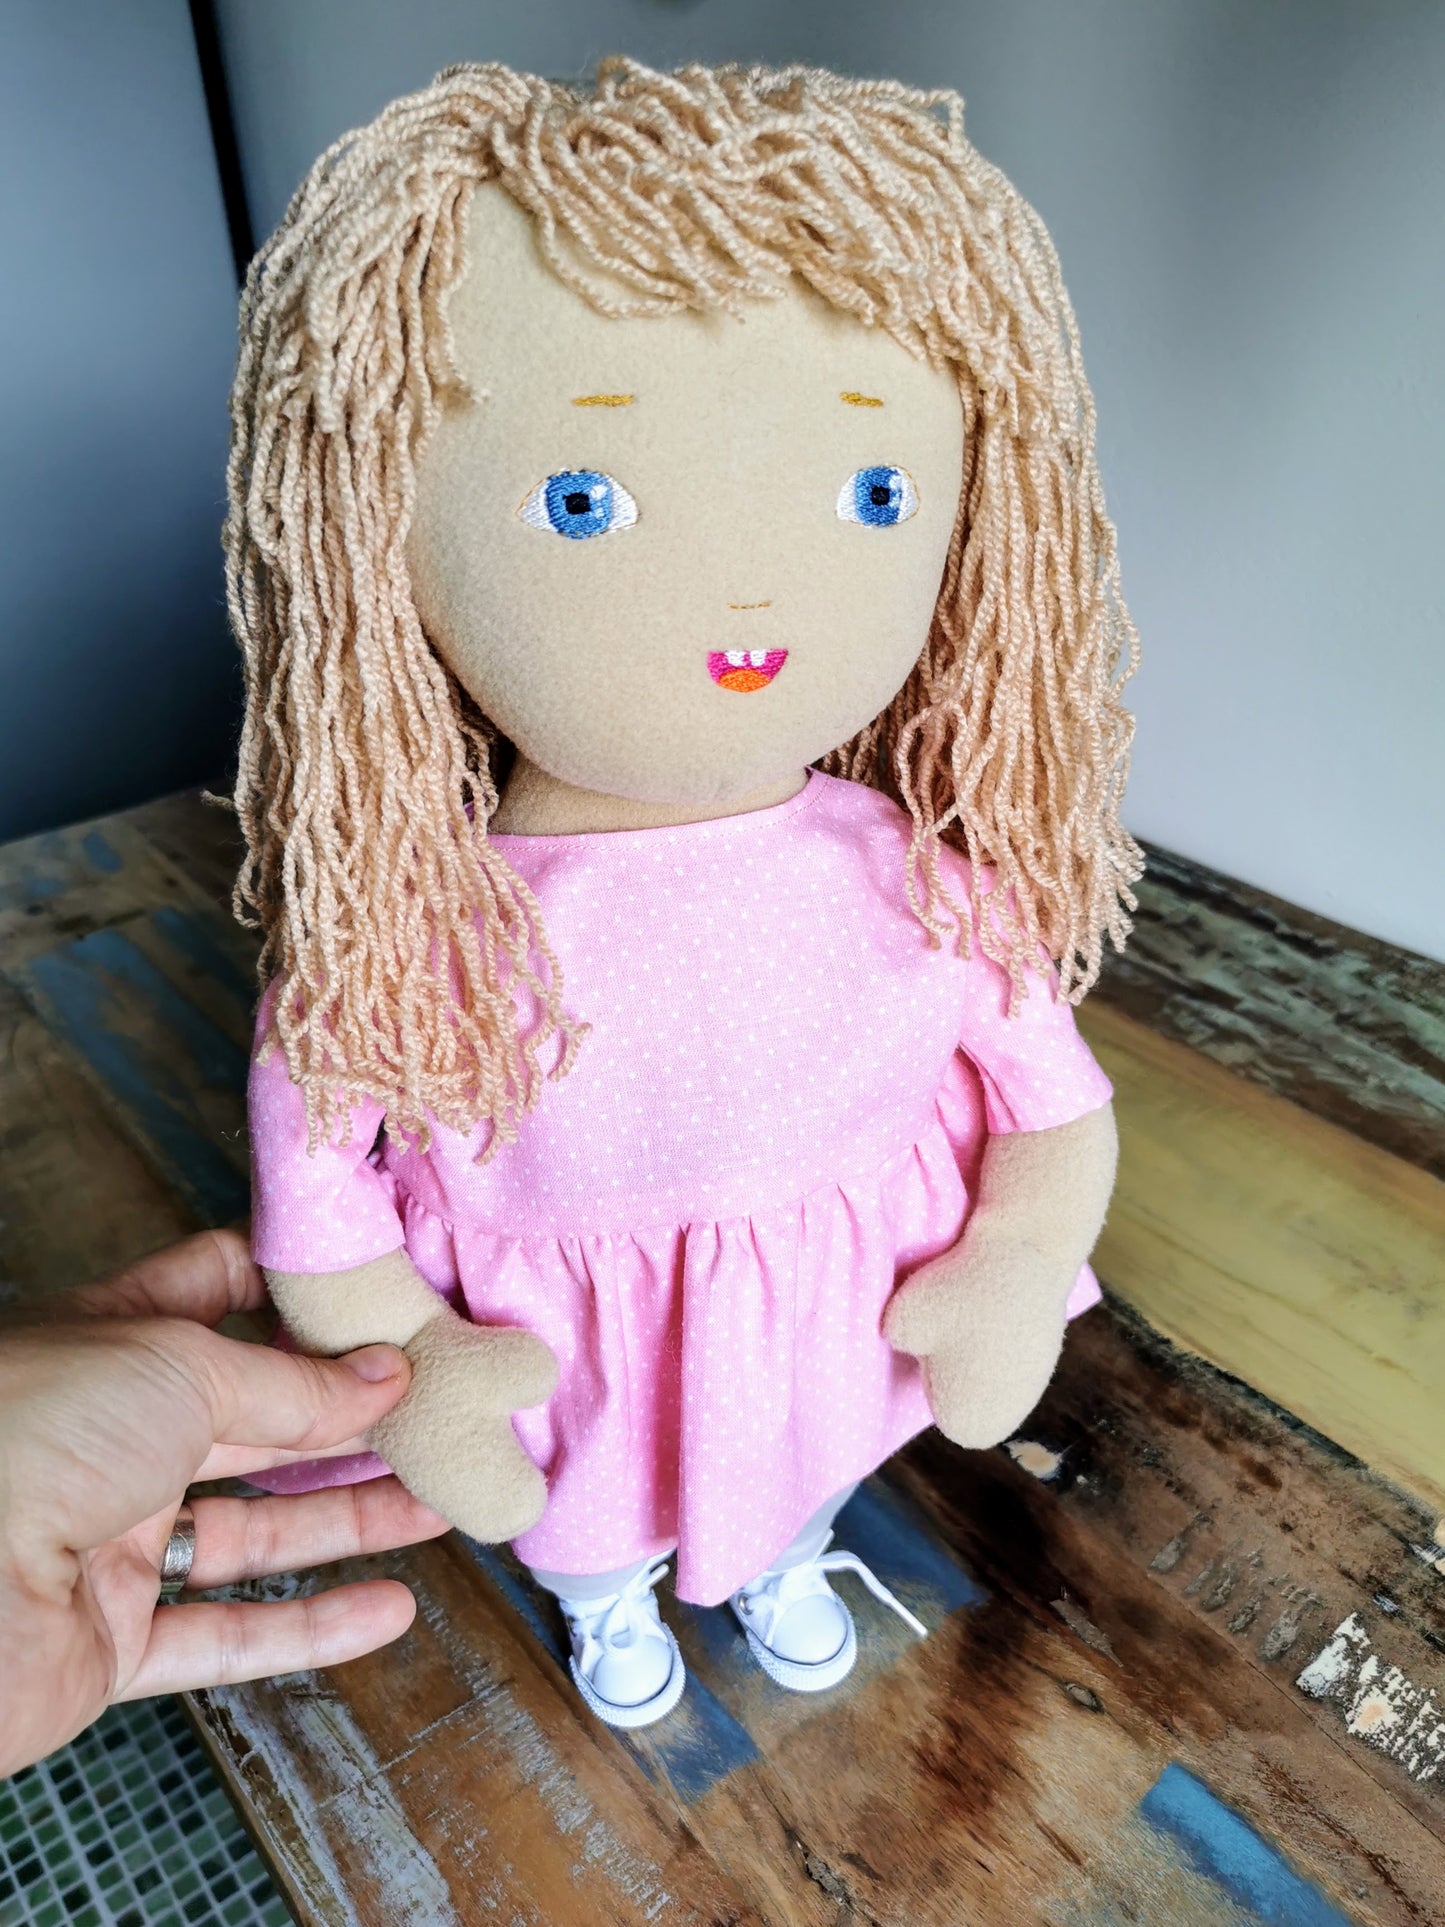 Custom Doll from Photo to Plush, dolls of real girl, replica of famous people, plush doll from photo, figurine mini-me dolls of your family 50 cm